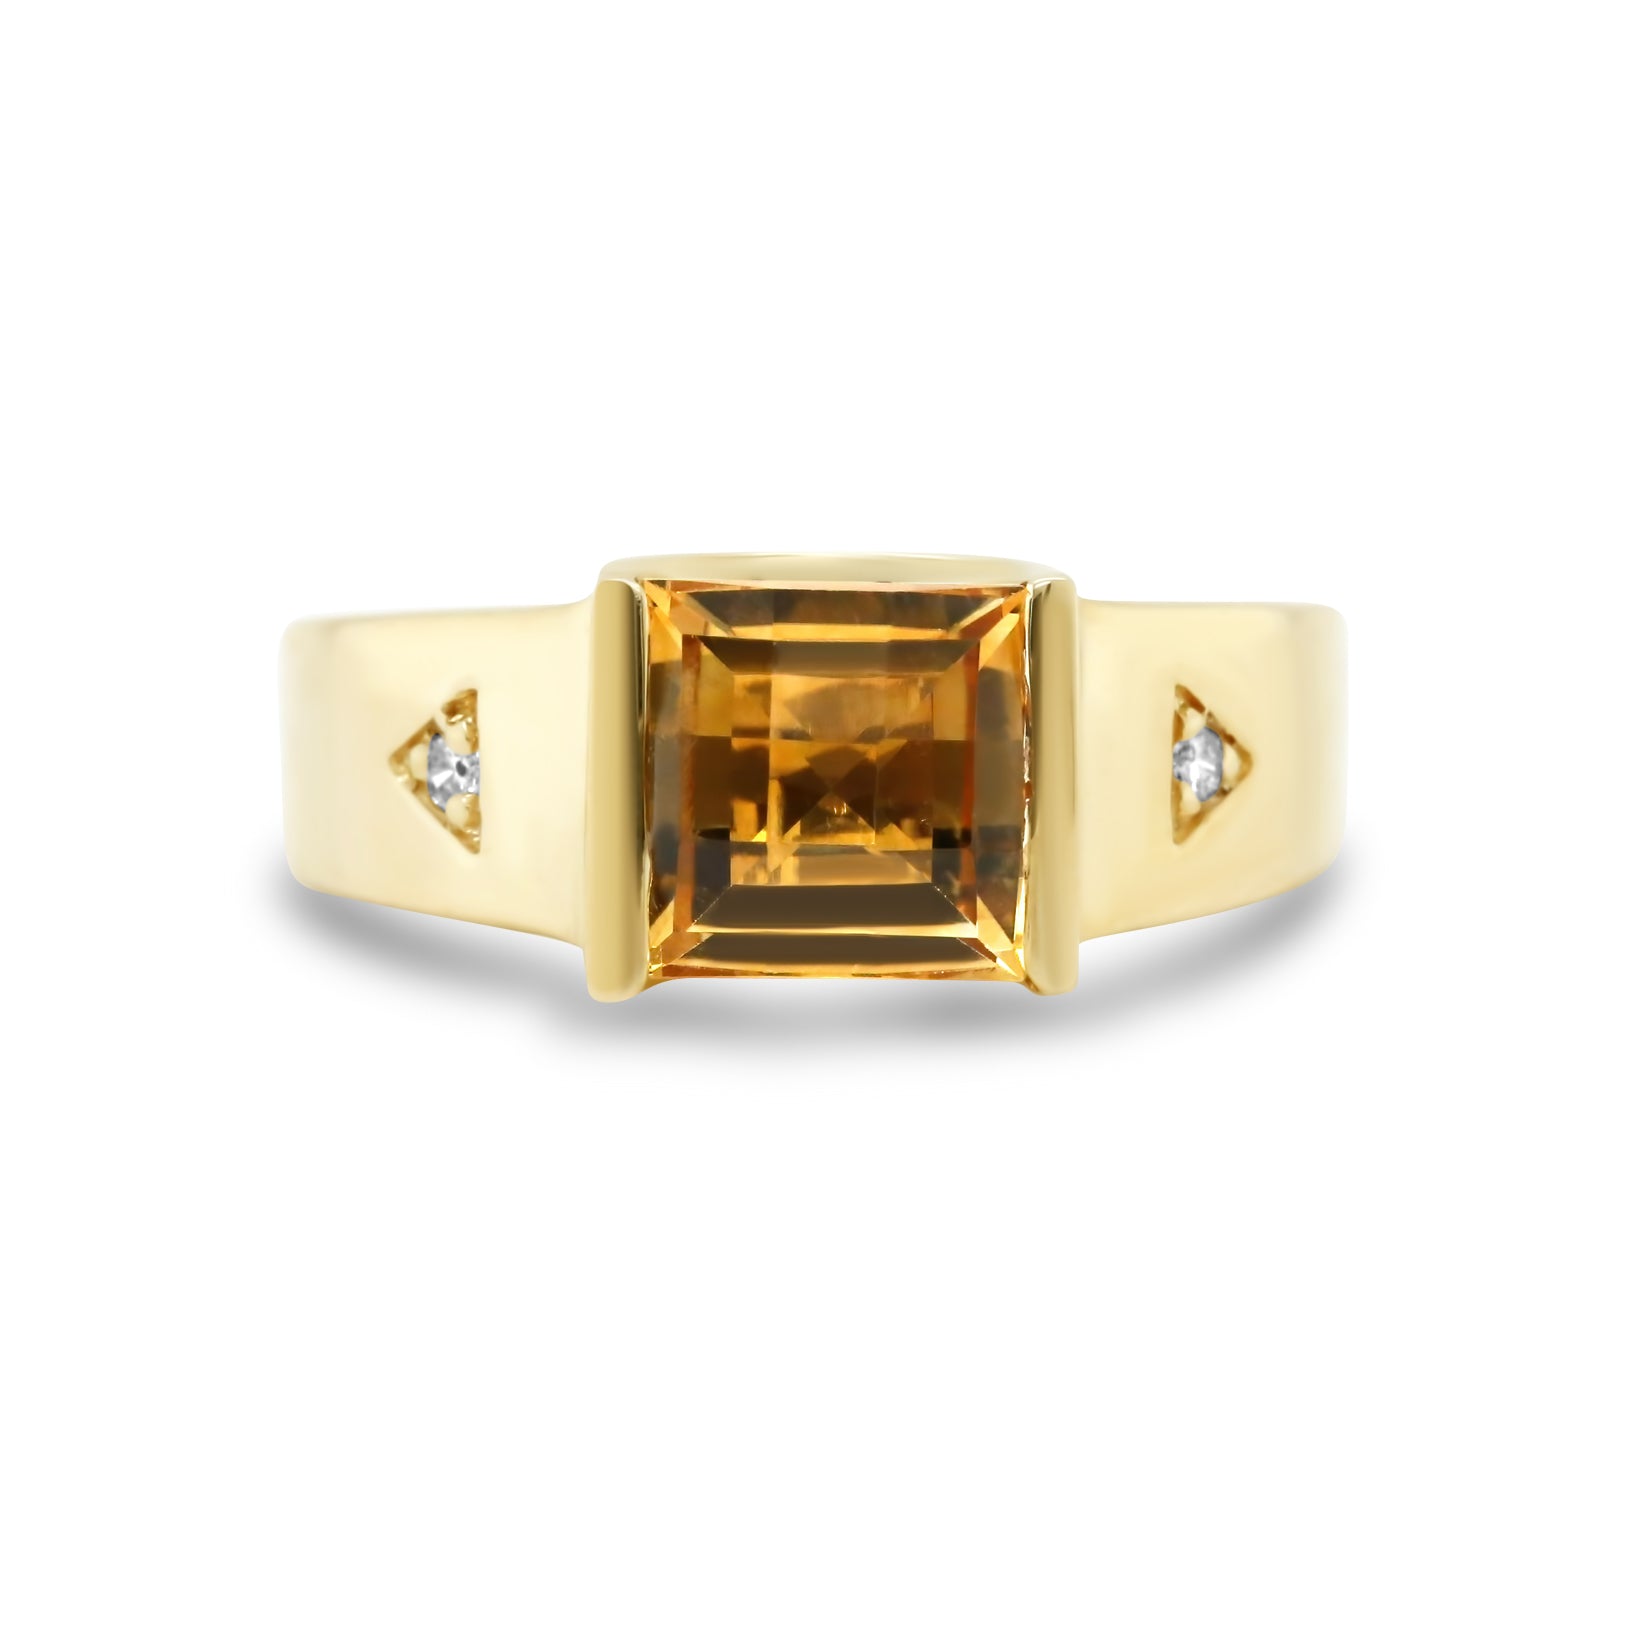 14k yellow gold bar set square citrine gemstone diamond triangle accents thick chunky estate right hand ring